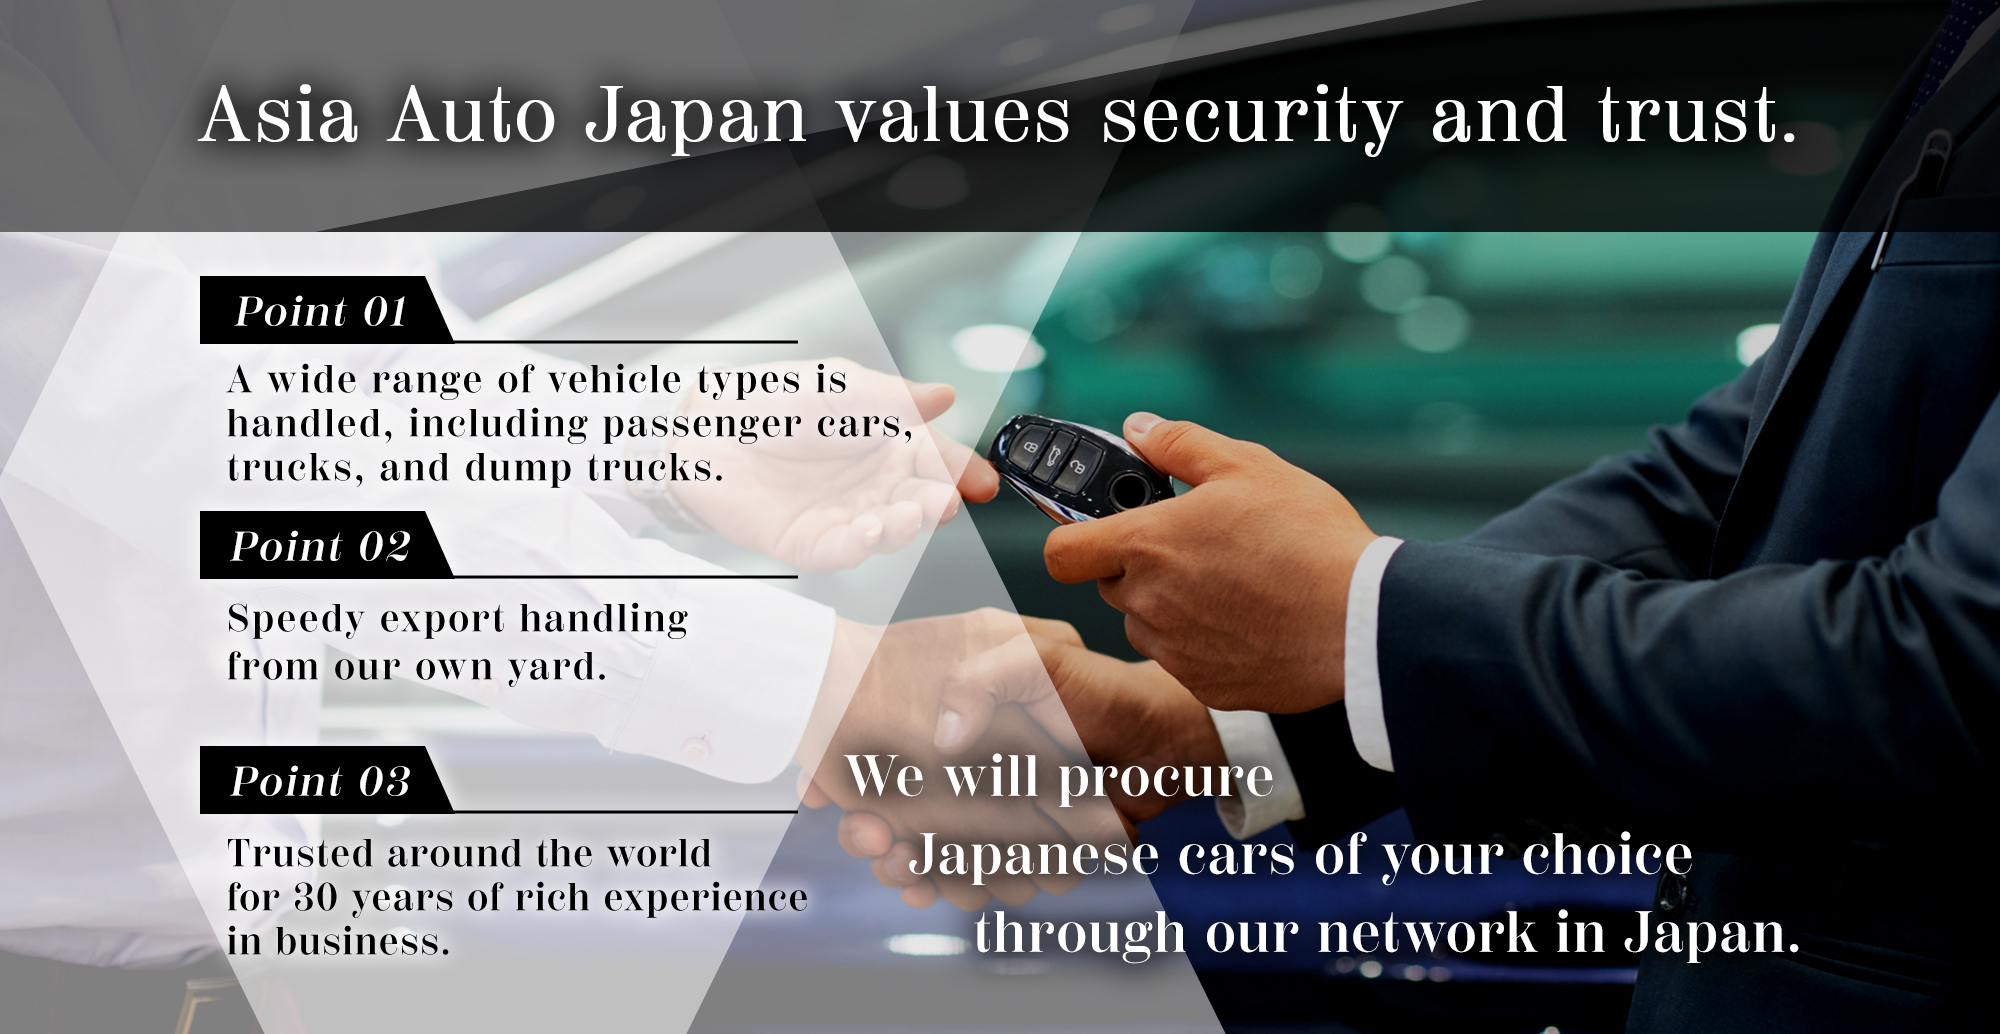 Asia Auto Japan values security and trust.